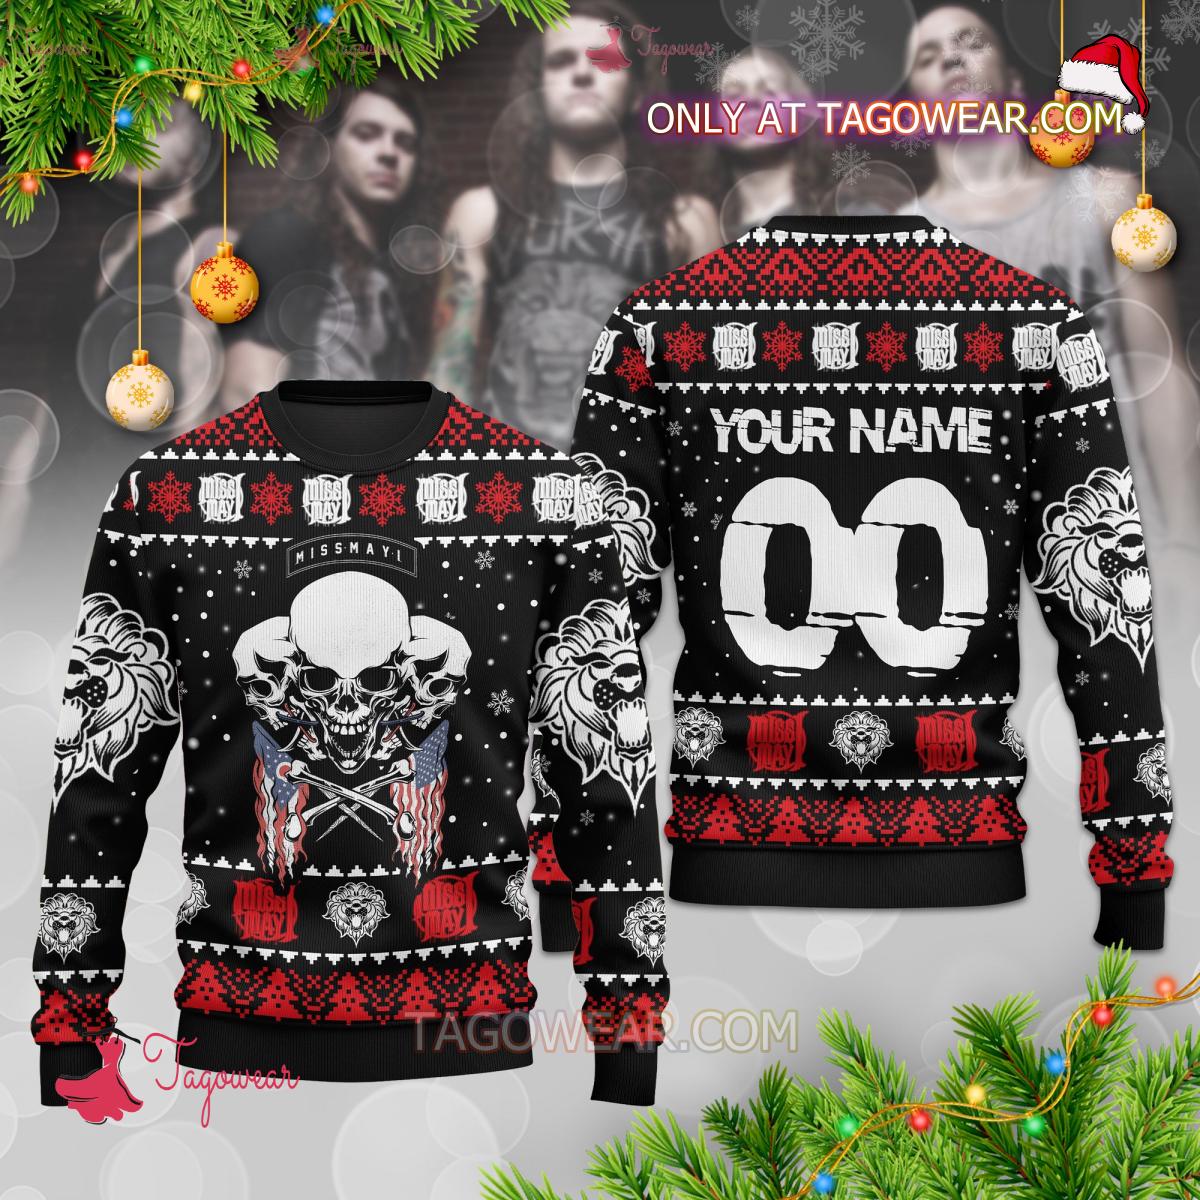 Miss May I Band Personalized Ugly Christmas Sweater